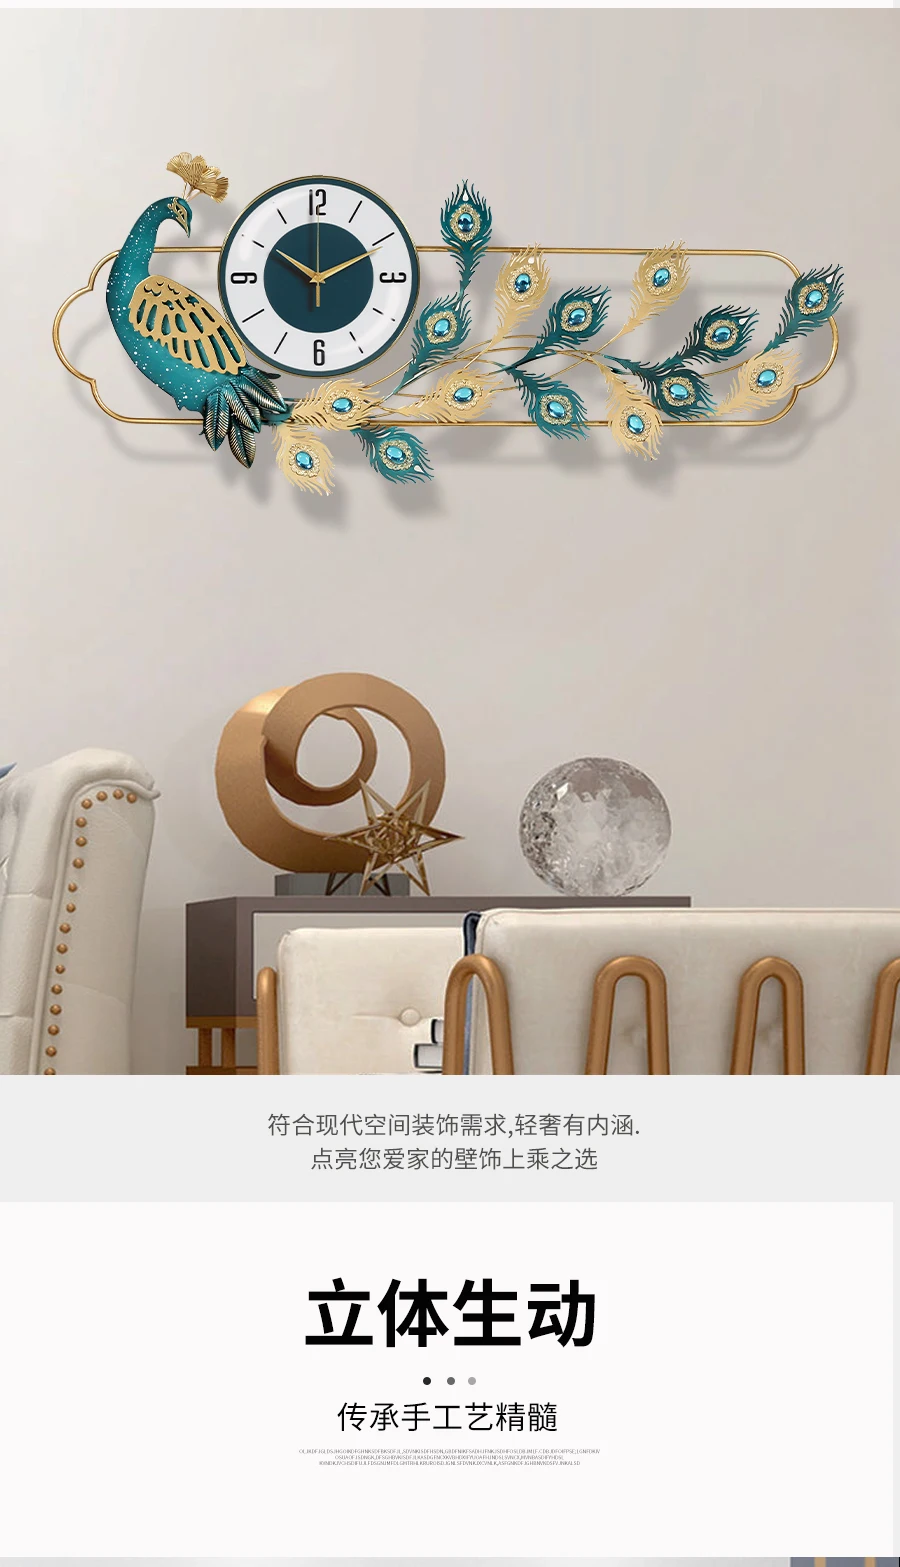 New Chinese Wall Clock Luxury Art Classic Wall Clock Electron Porch Silent  Living Room Reloj Cocina